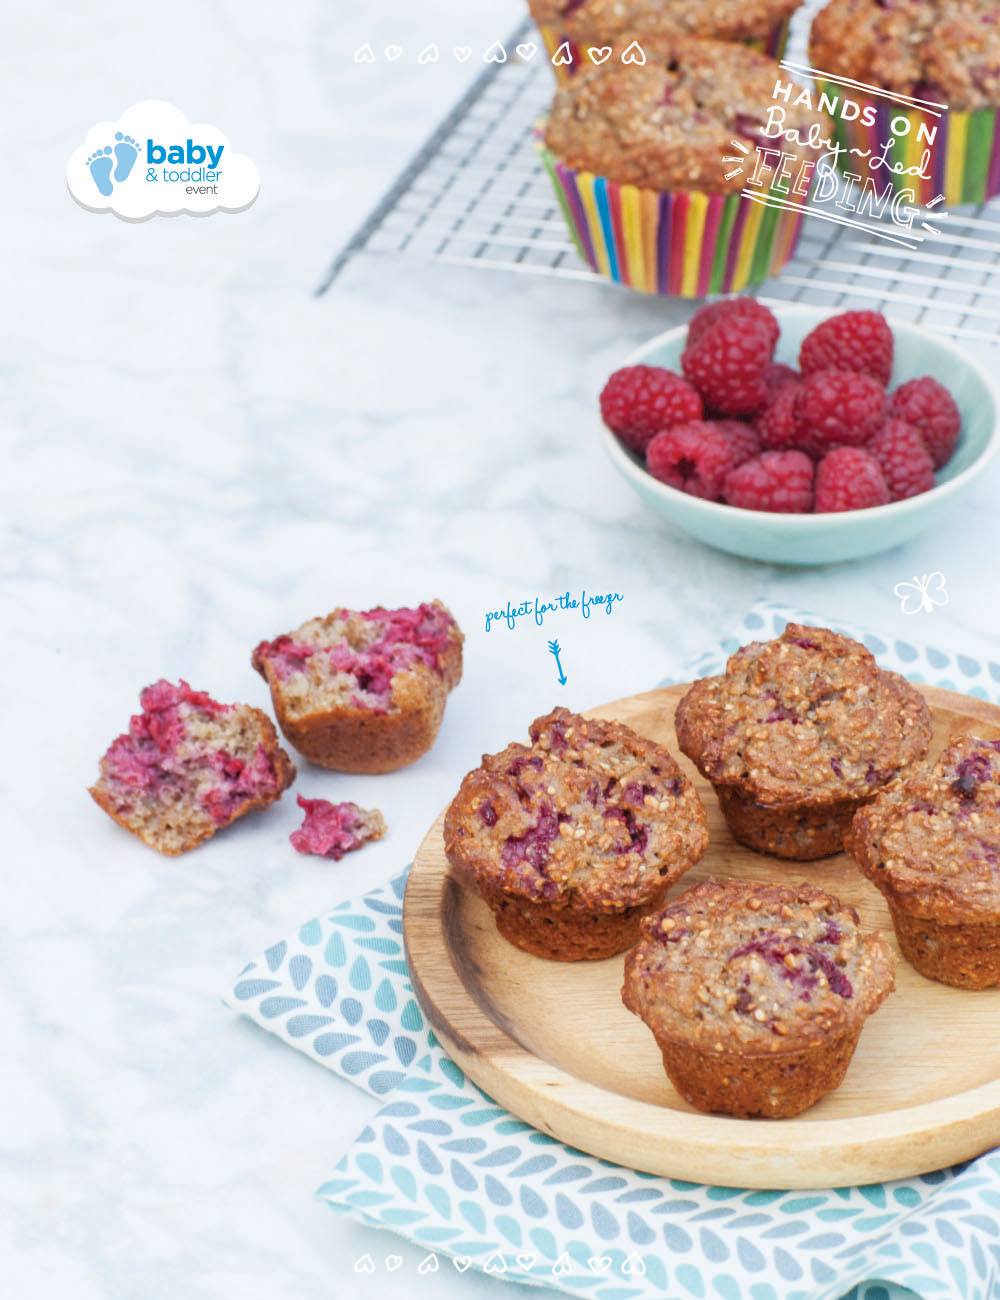 Baby-Led-Feeding-Dunnes-Stores-Healthy-Breakfast-Muffins-Recipe-Image